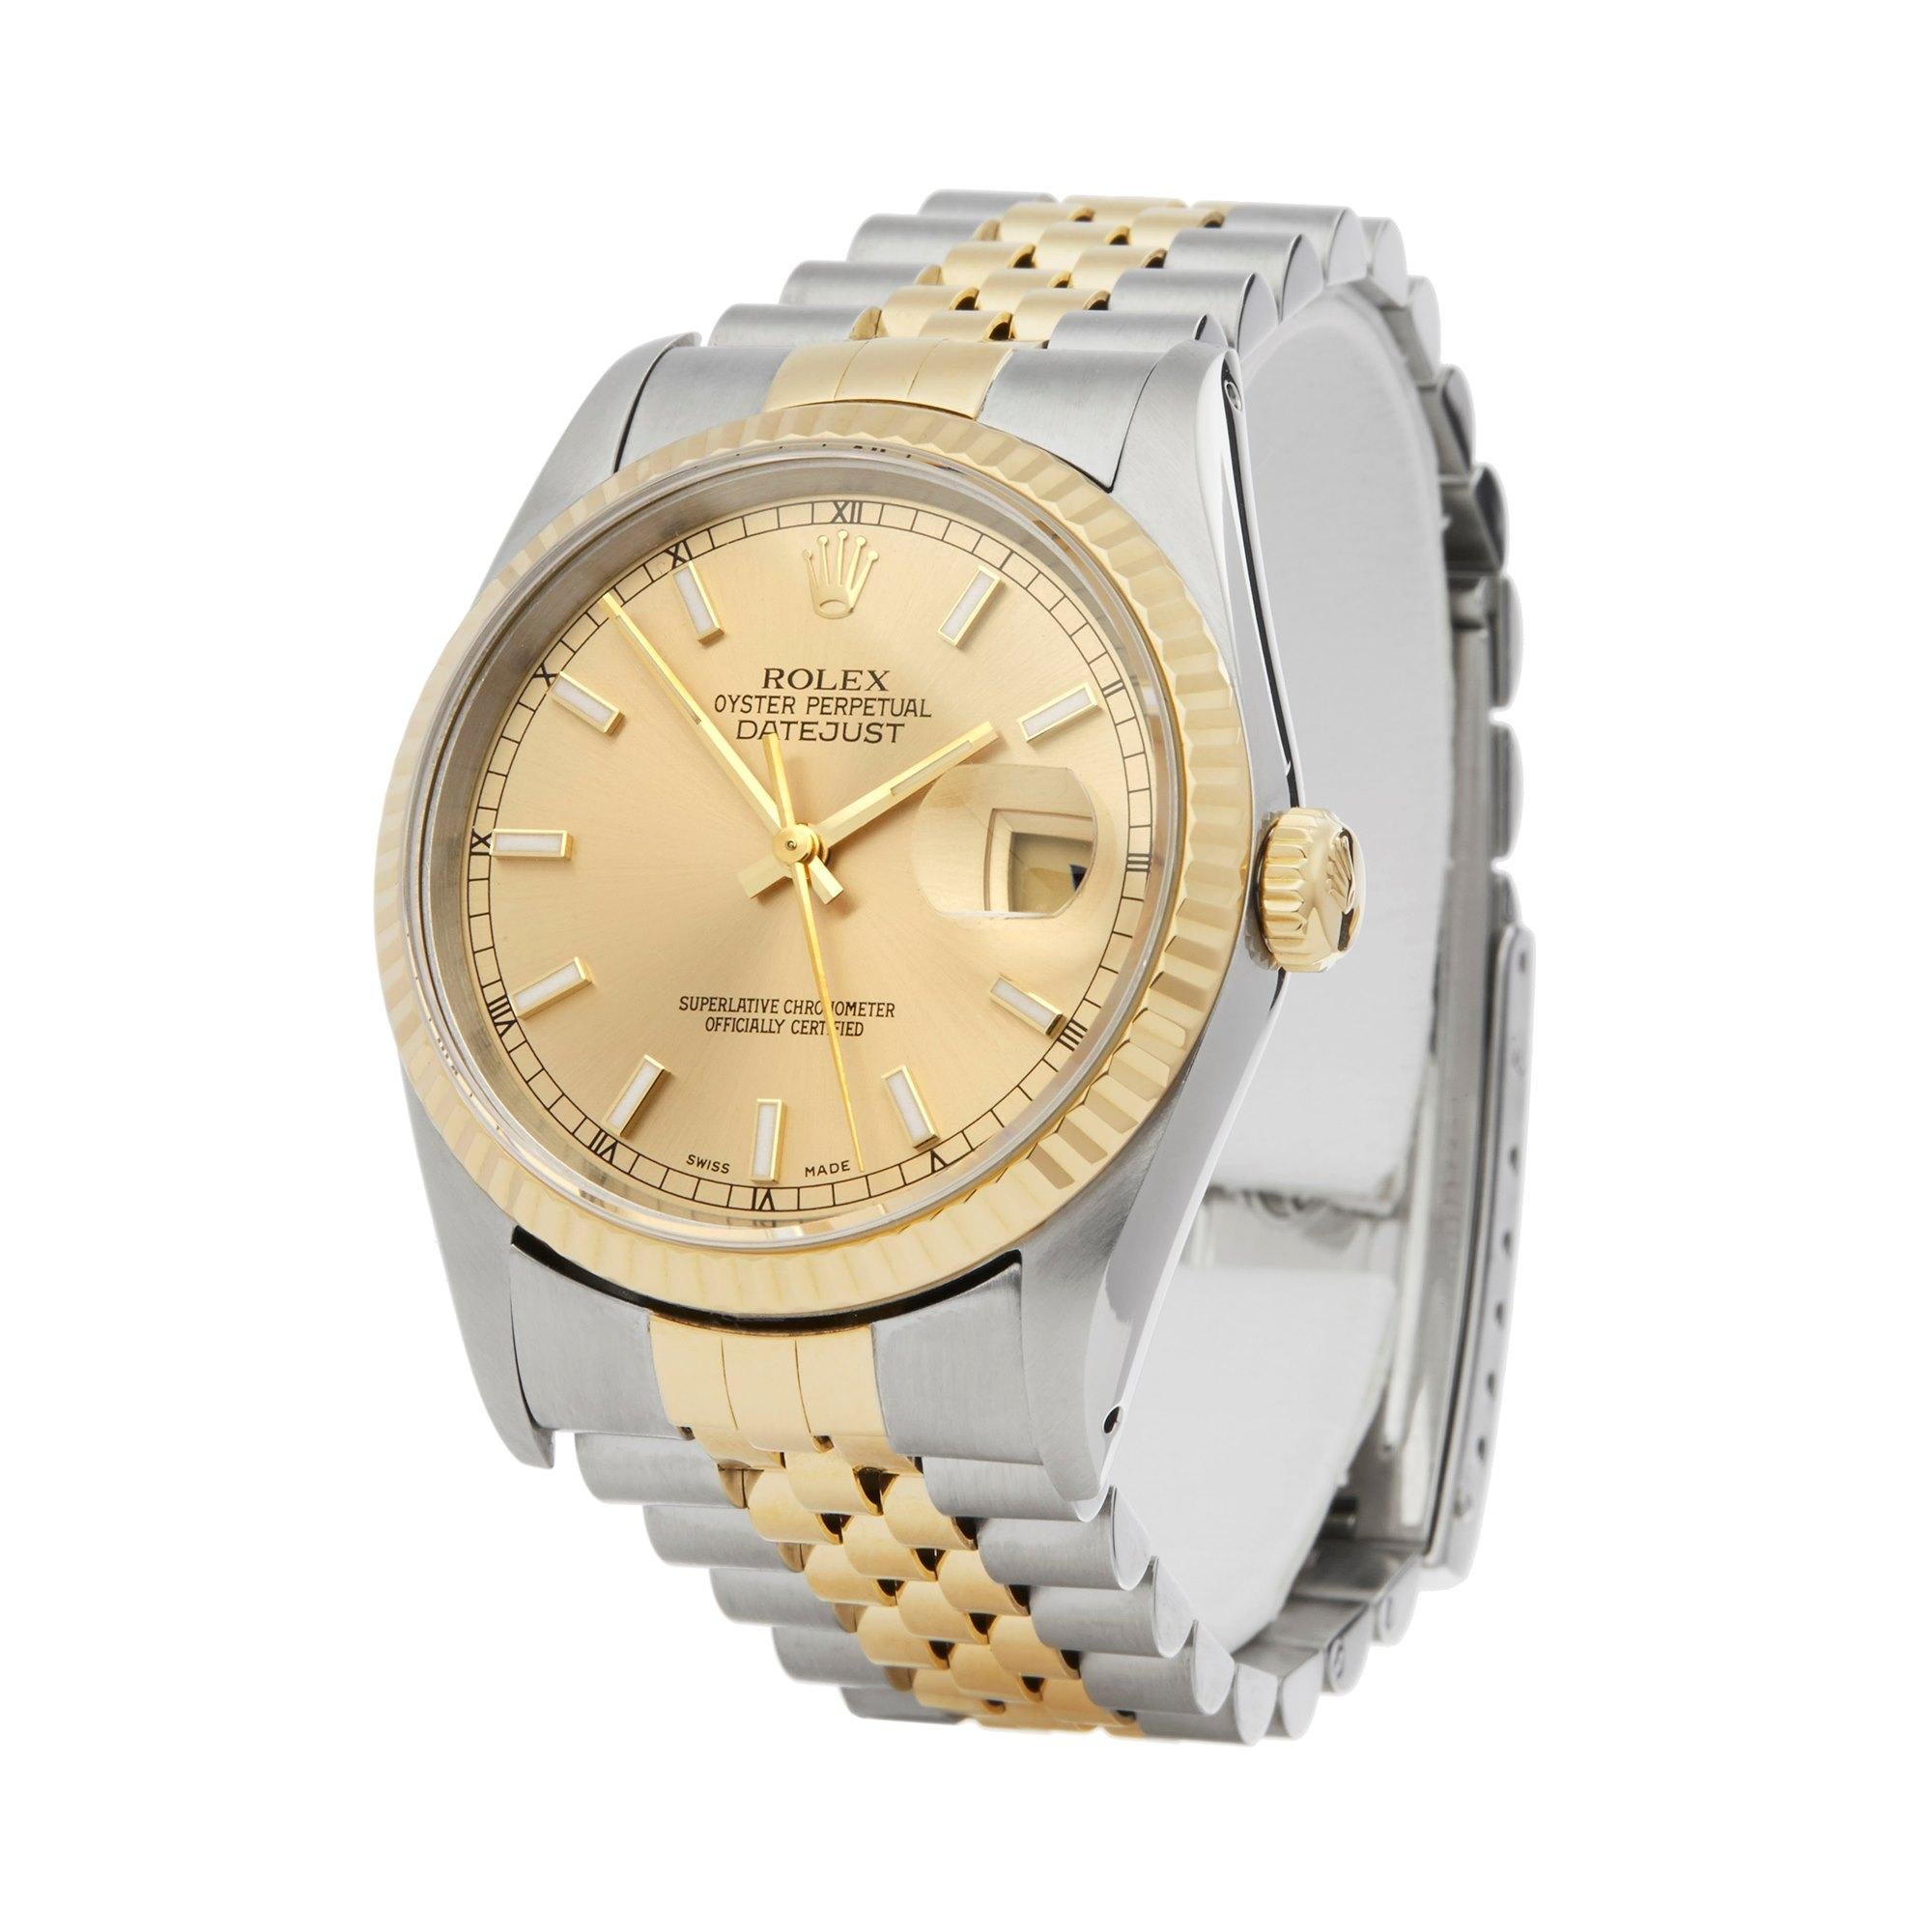 Ref: W6230
Manufacturer: Rolex
Model: Datejust
Model Ref: 16233
Age: 9th April 2001
Gender: Mens
Complete With: Box & Guarantee
Dial: Champagne With Diamond Markers
Glass: Sapphire Crystal
Movement: Automatic
Water Resistance: To Manufacturers